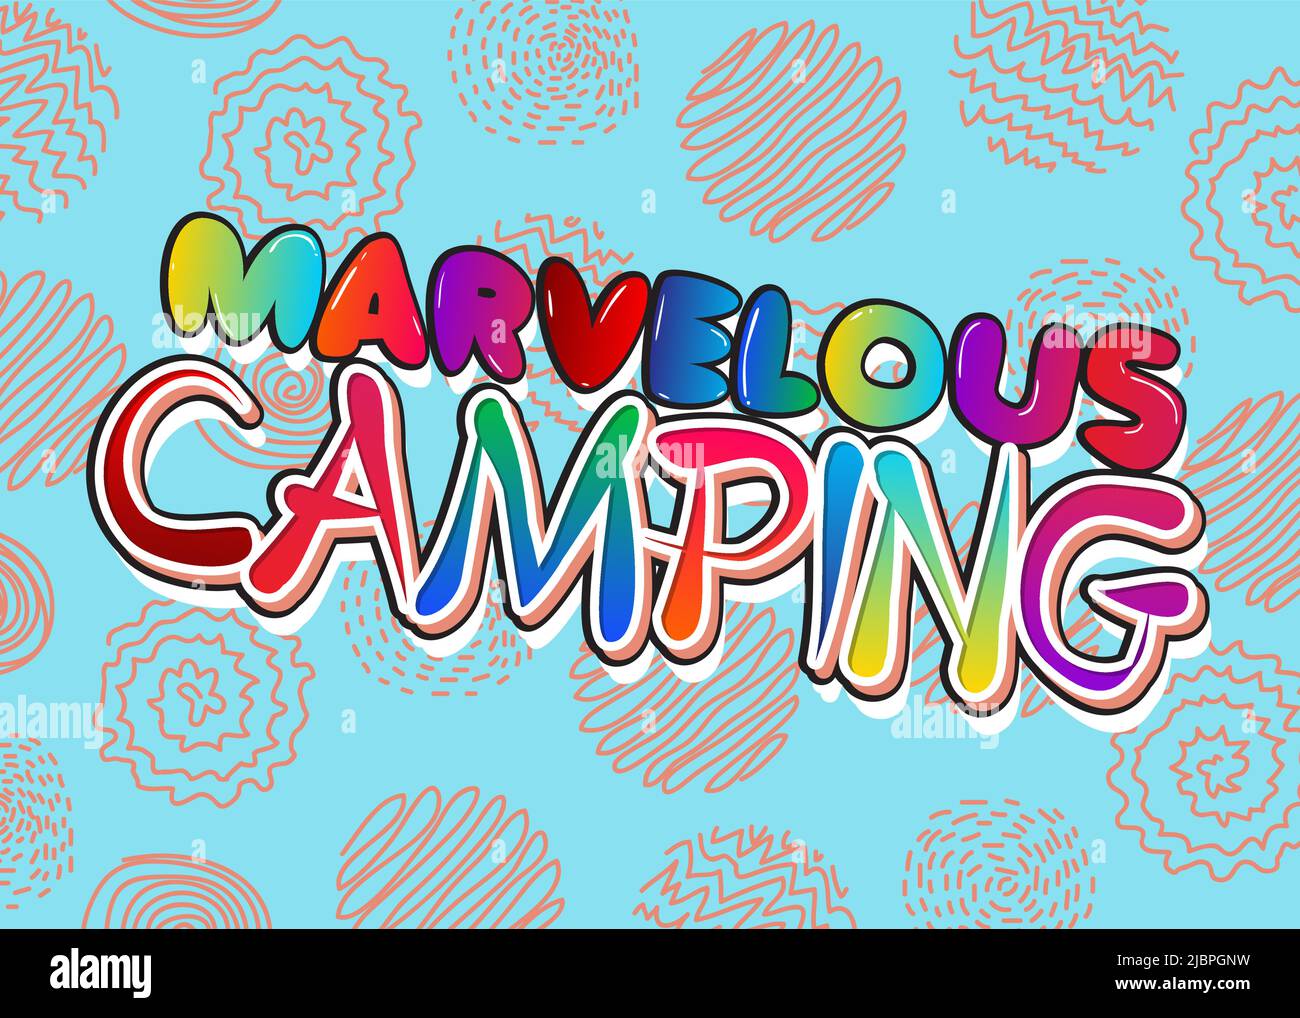 Kids Letters word Marvelous Camping. Word written with Children's font in cartoon style. Stock Vector